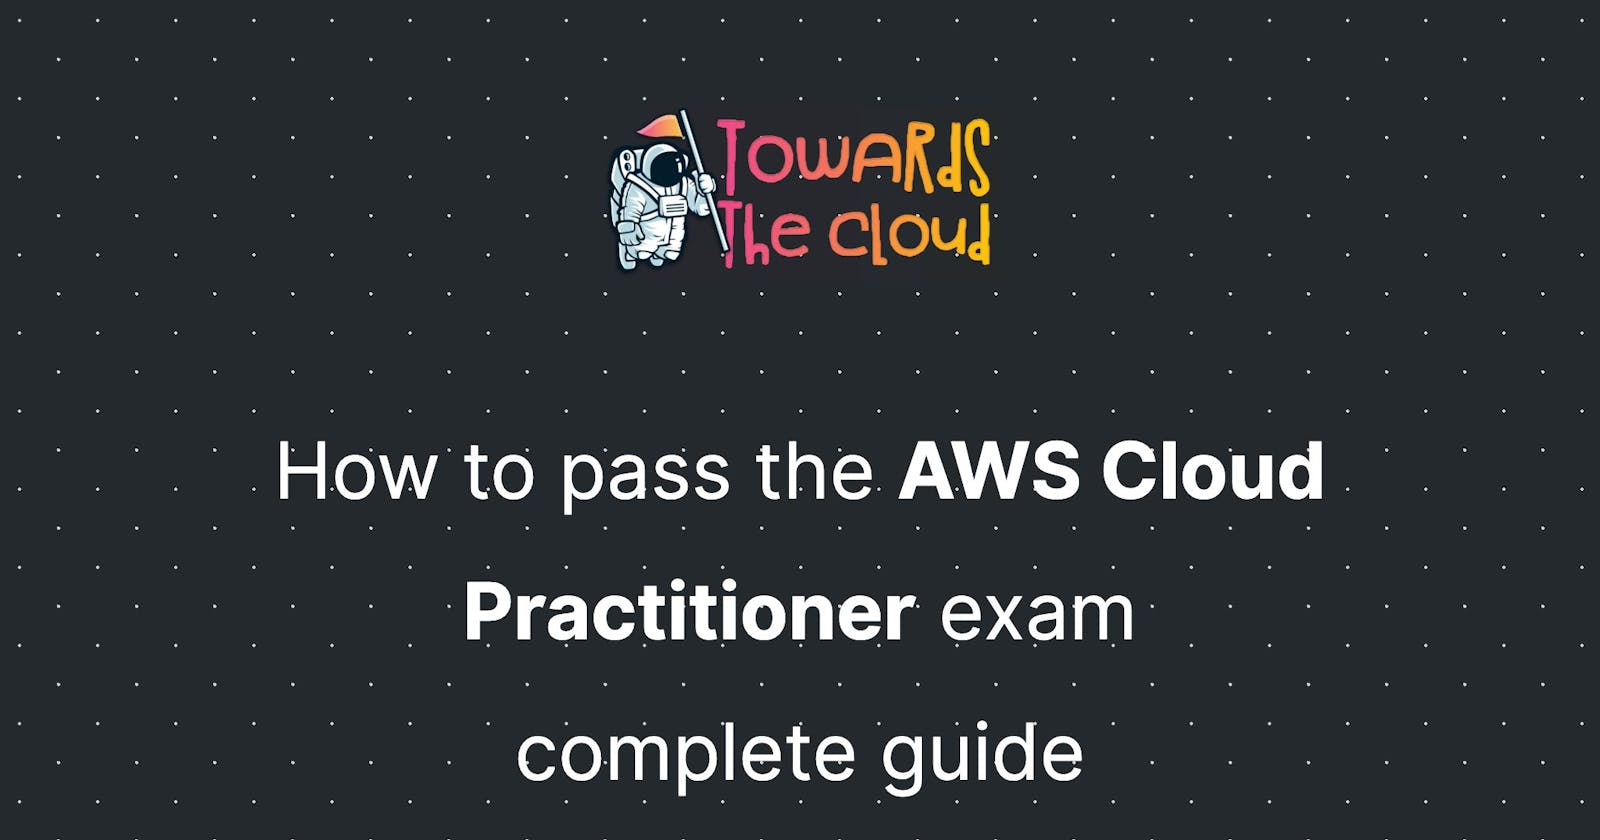 How to pass the AWS Cloud Practitioner exam - complete guide